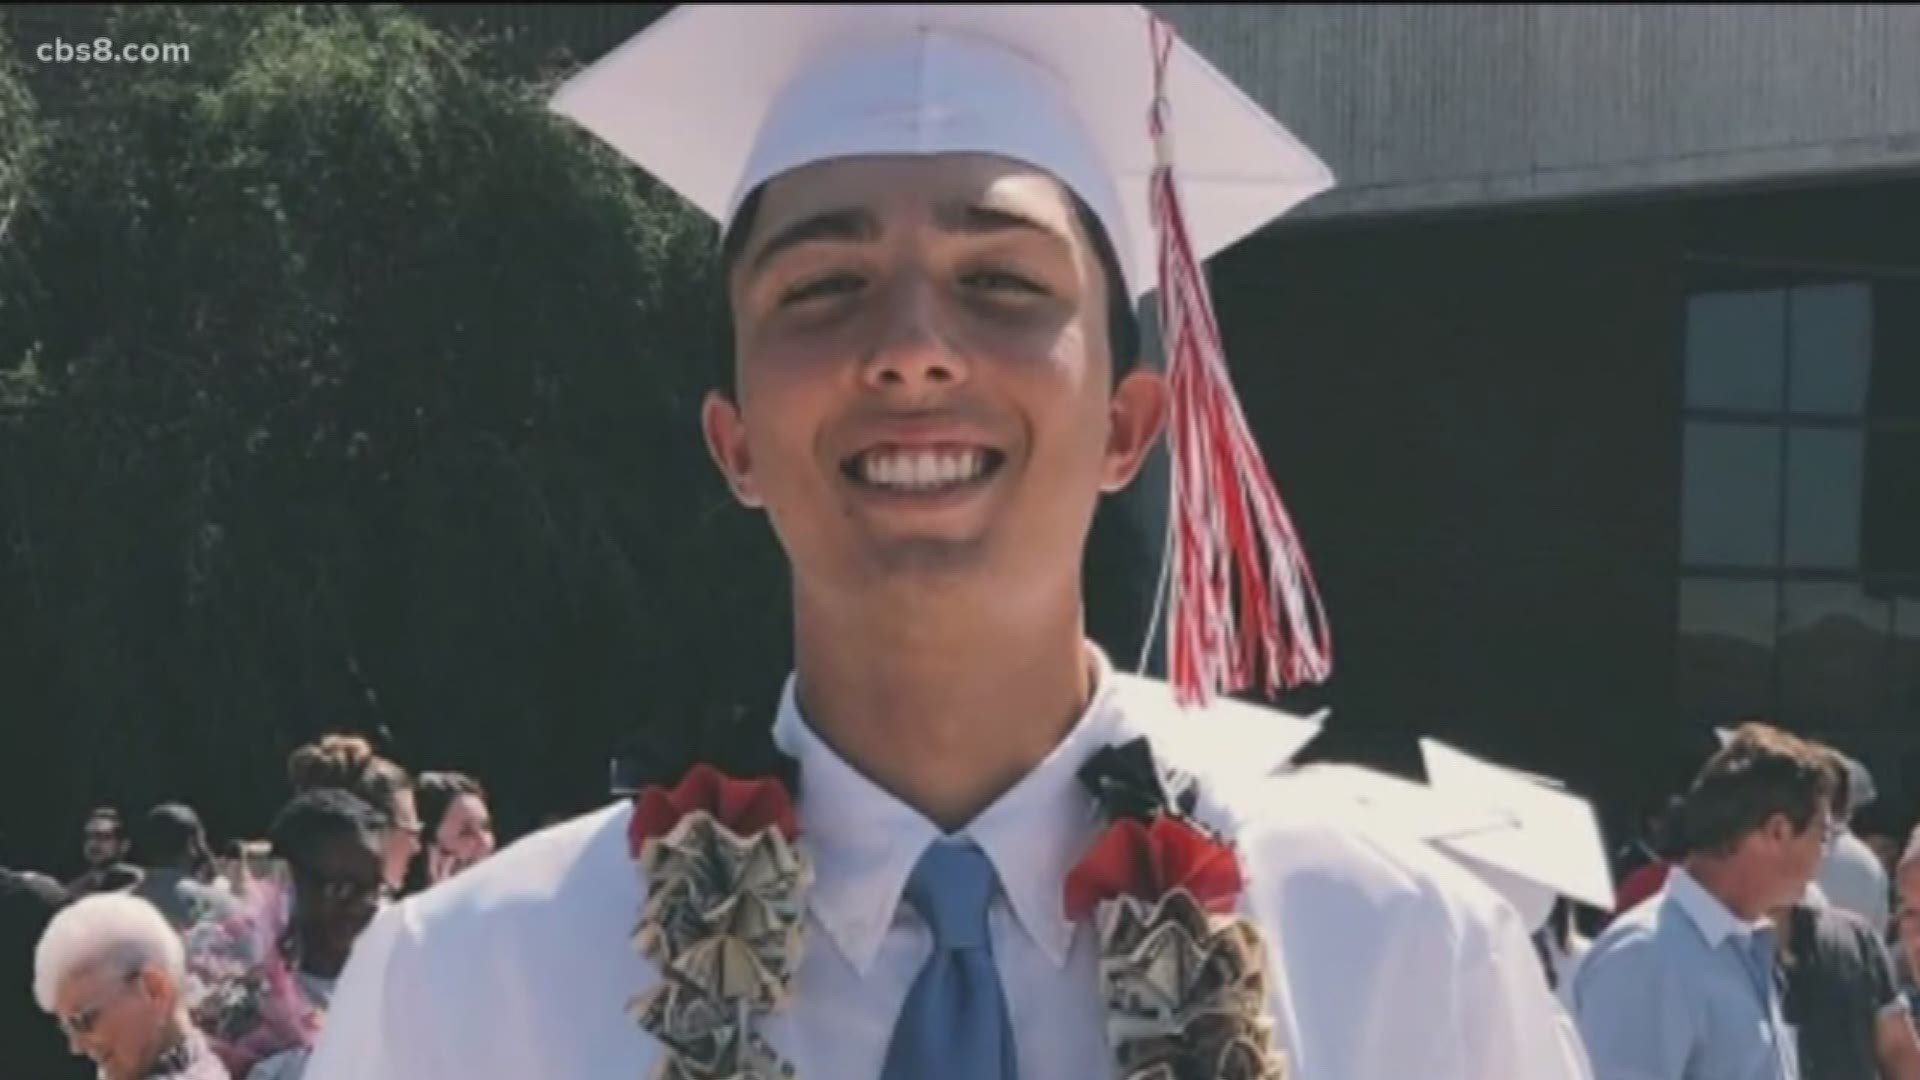 Dylan Hernandez, a 19-year-old San Diego State University freshman who was injured last week at an on-campus fraternity event, has died, SDSU President said.